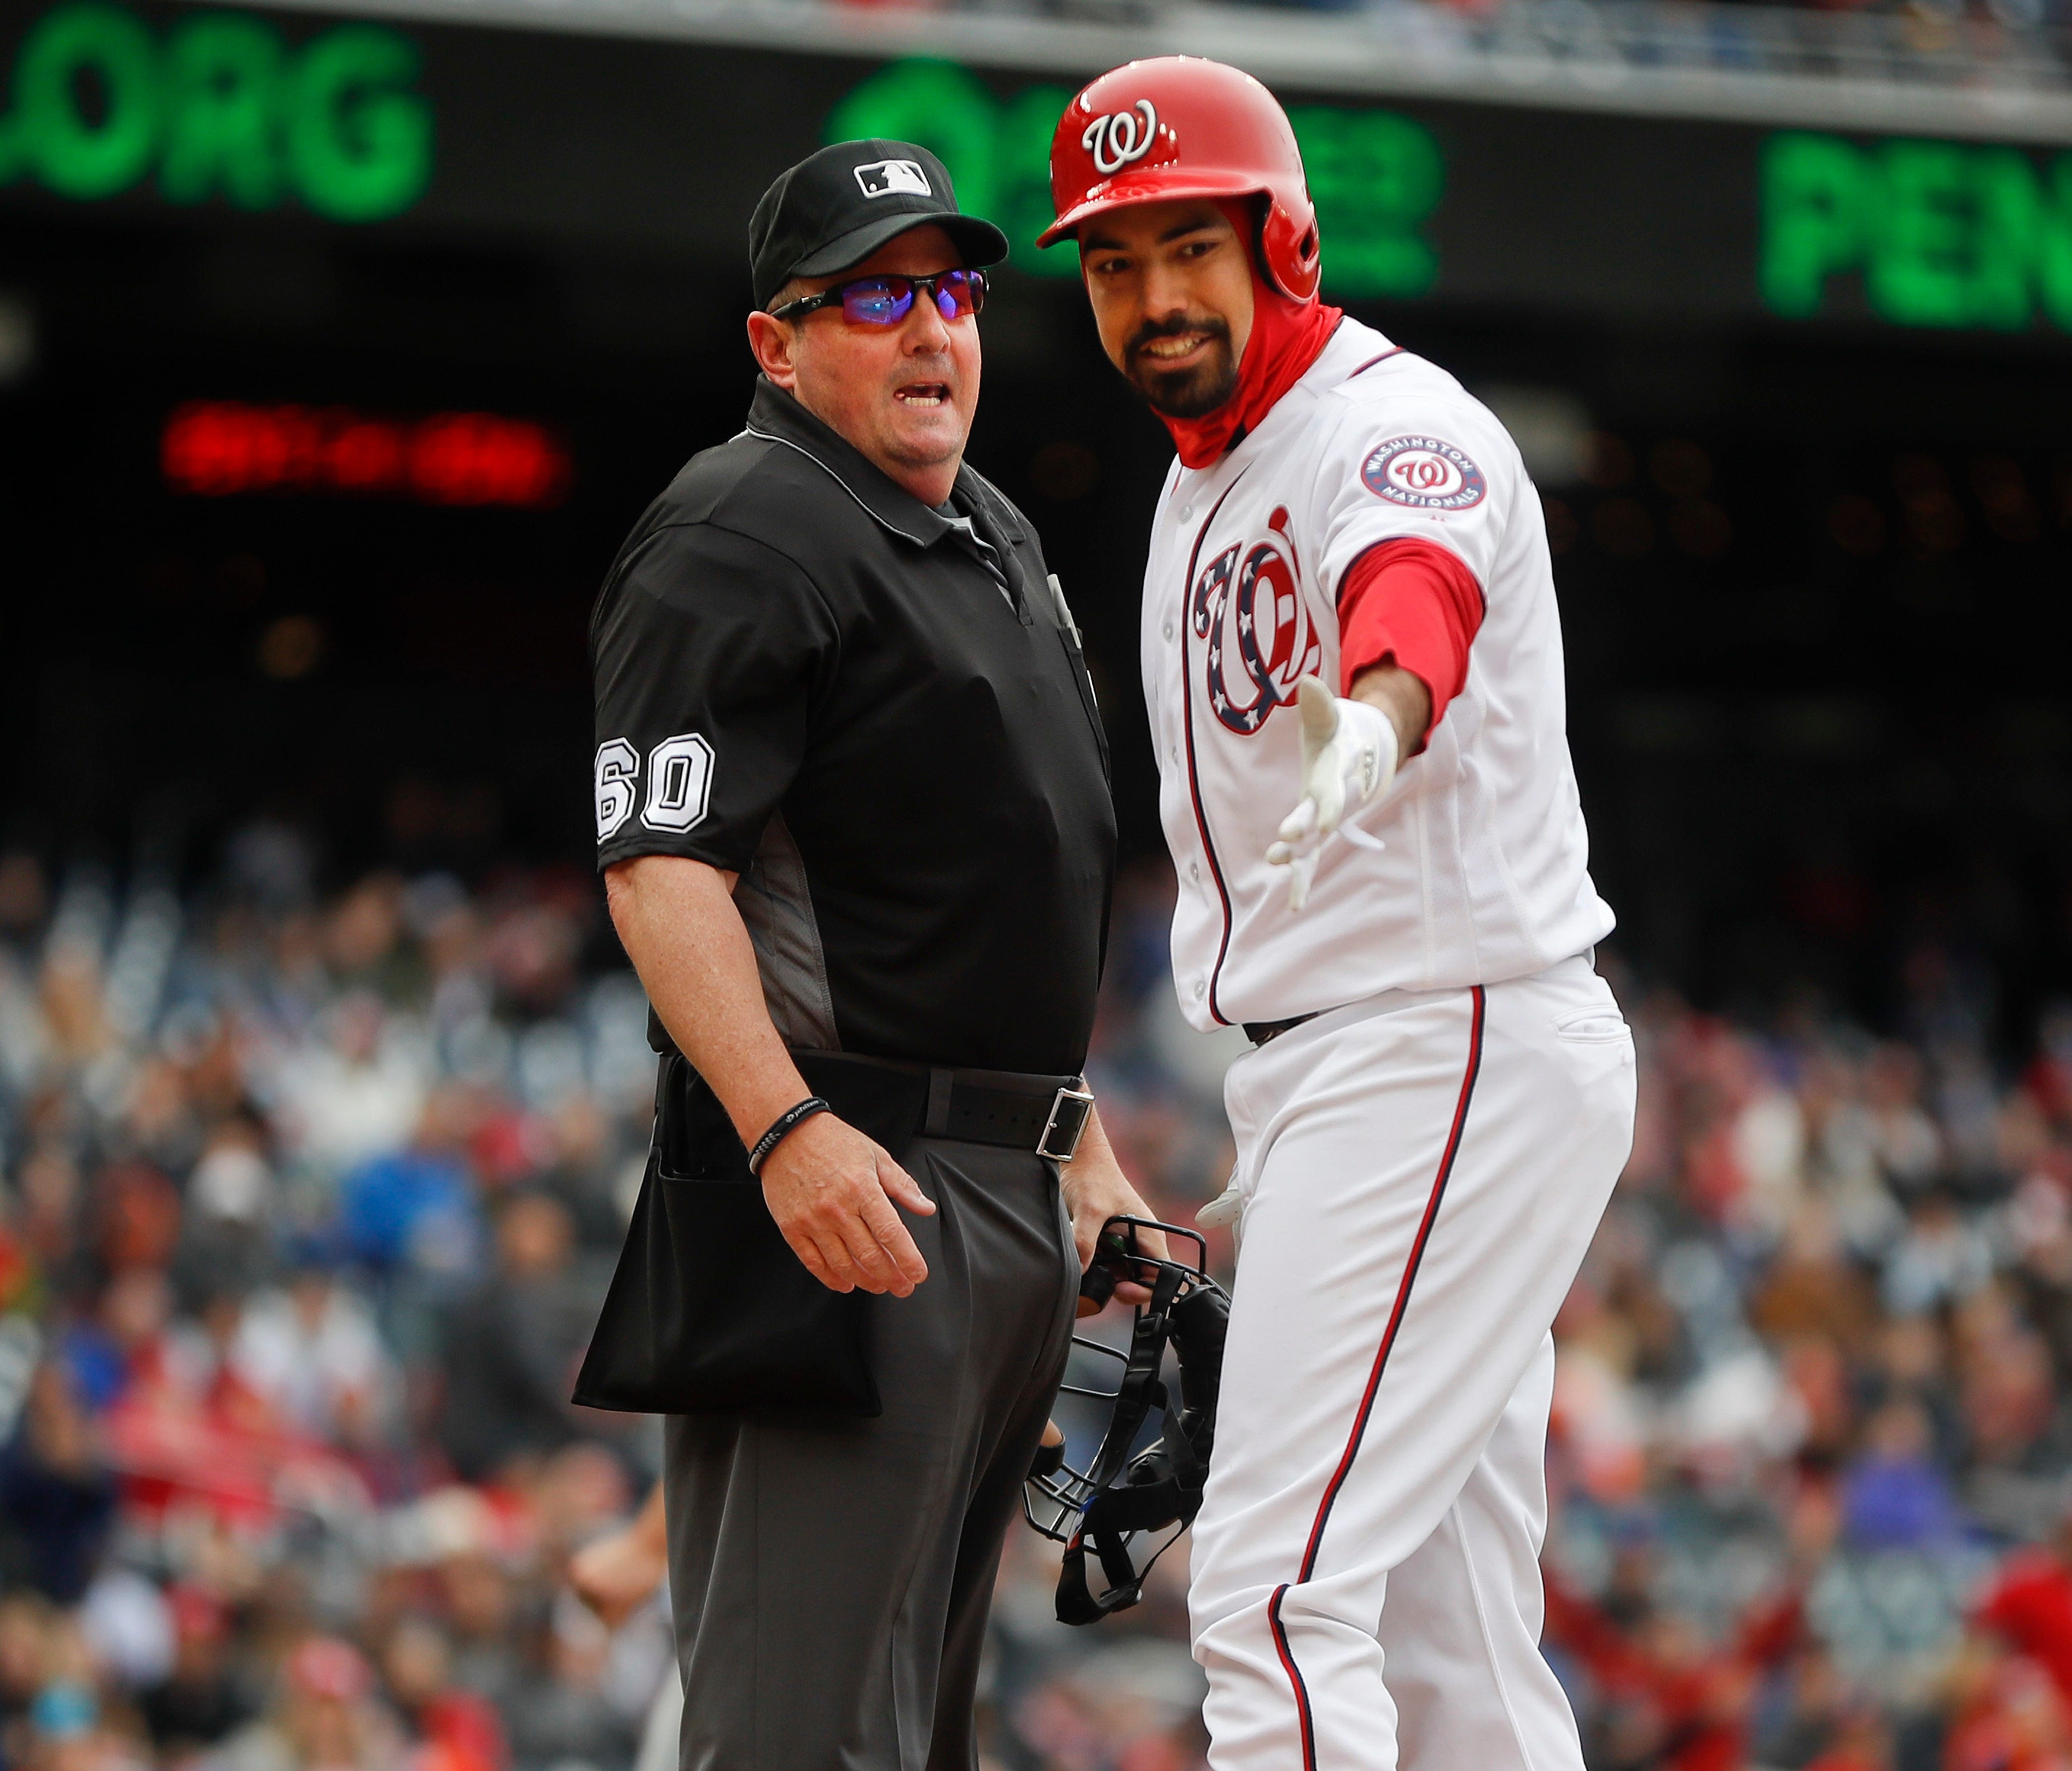 Anthony Rendon argues with umpire Marty Foster after being ejected.